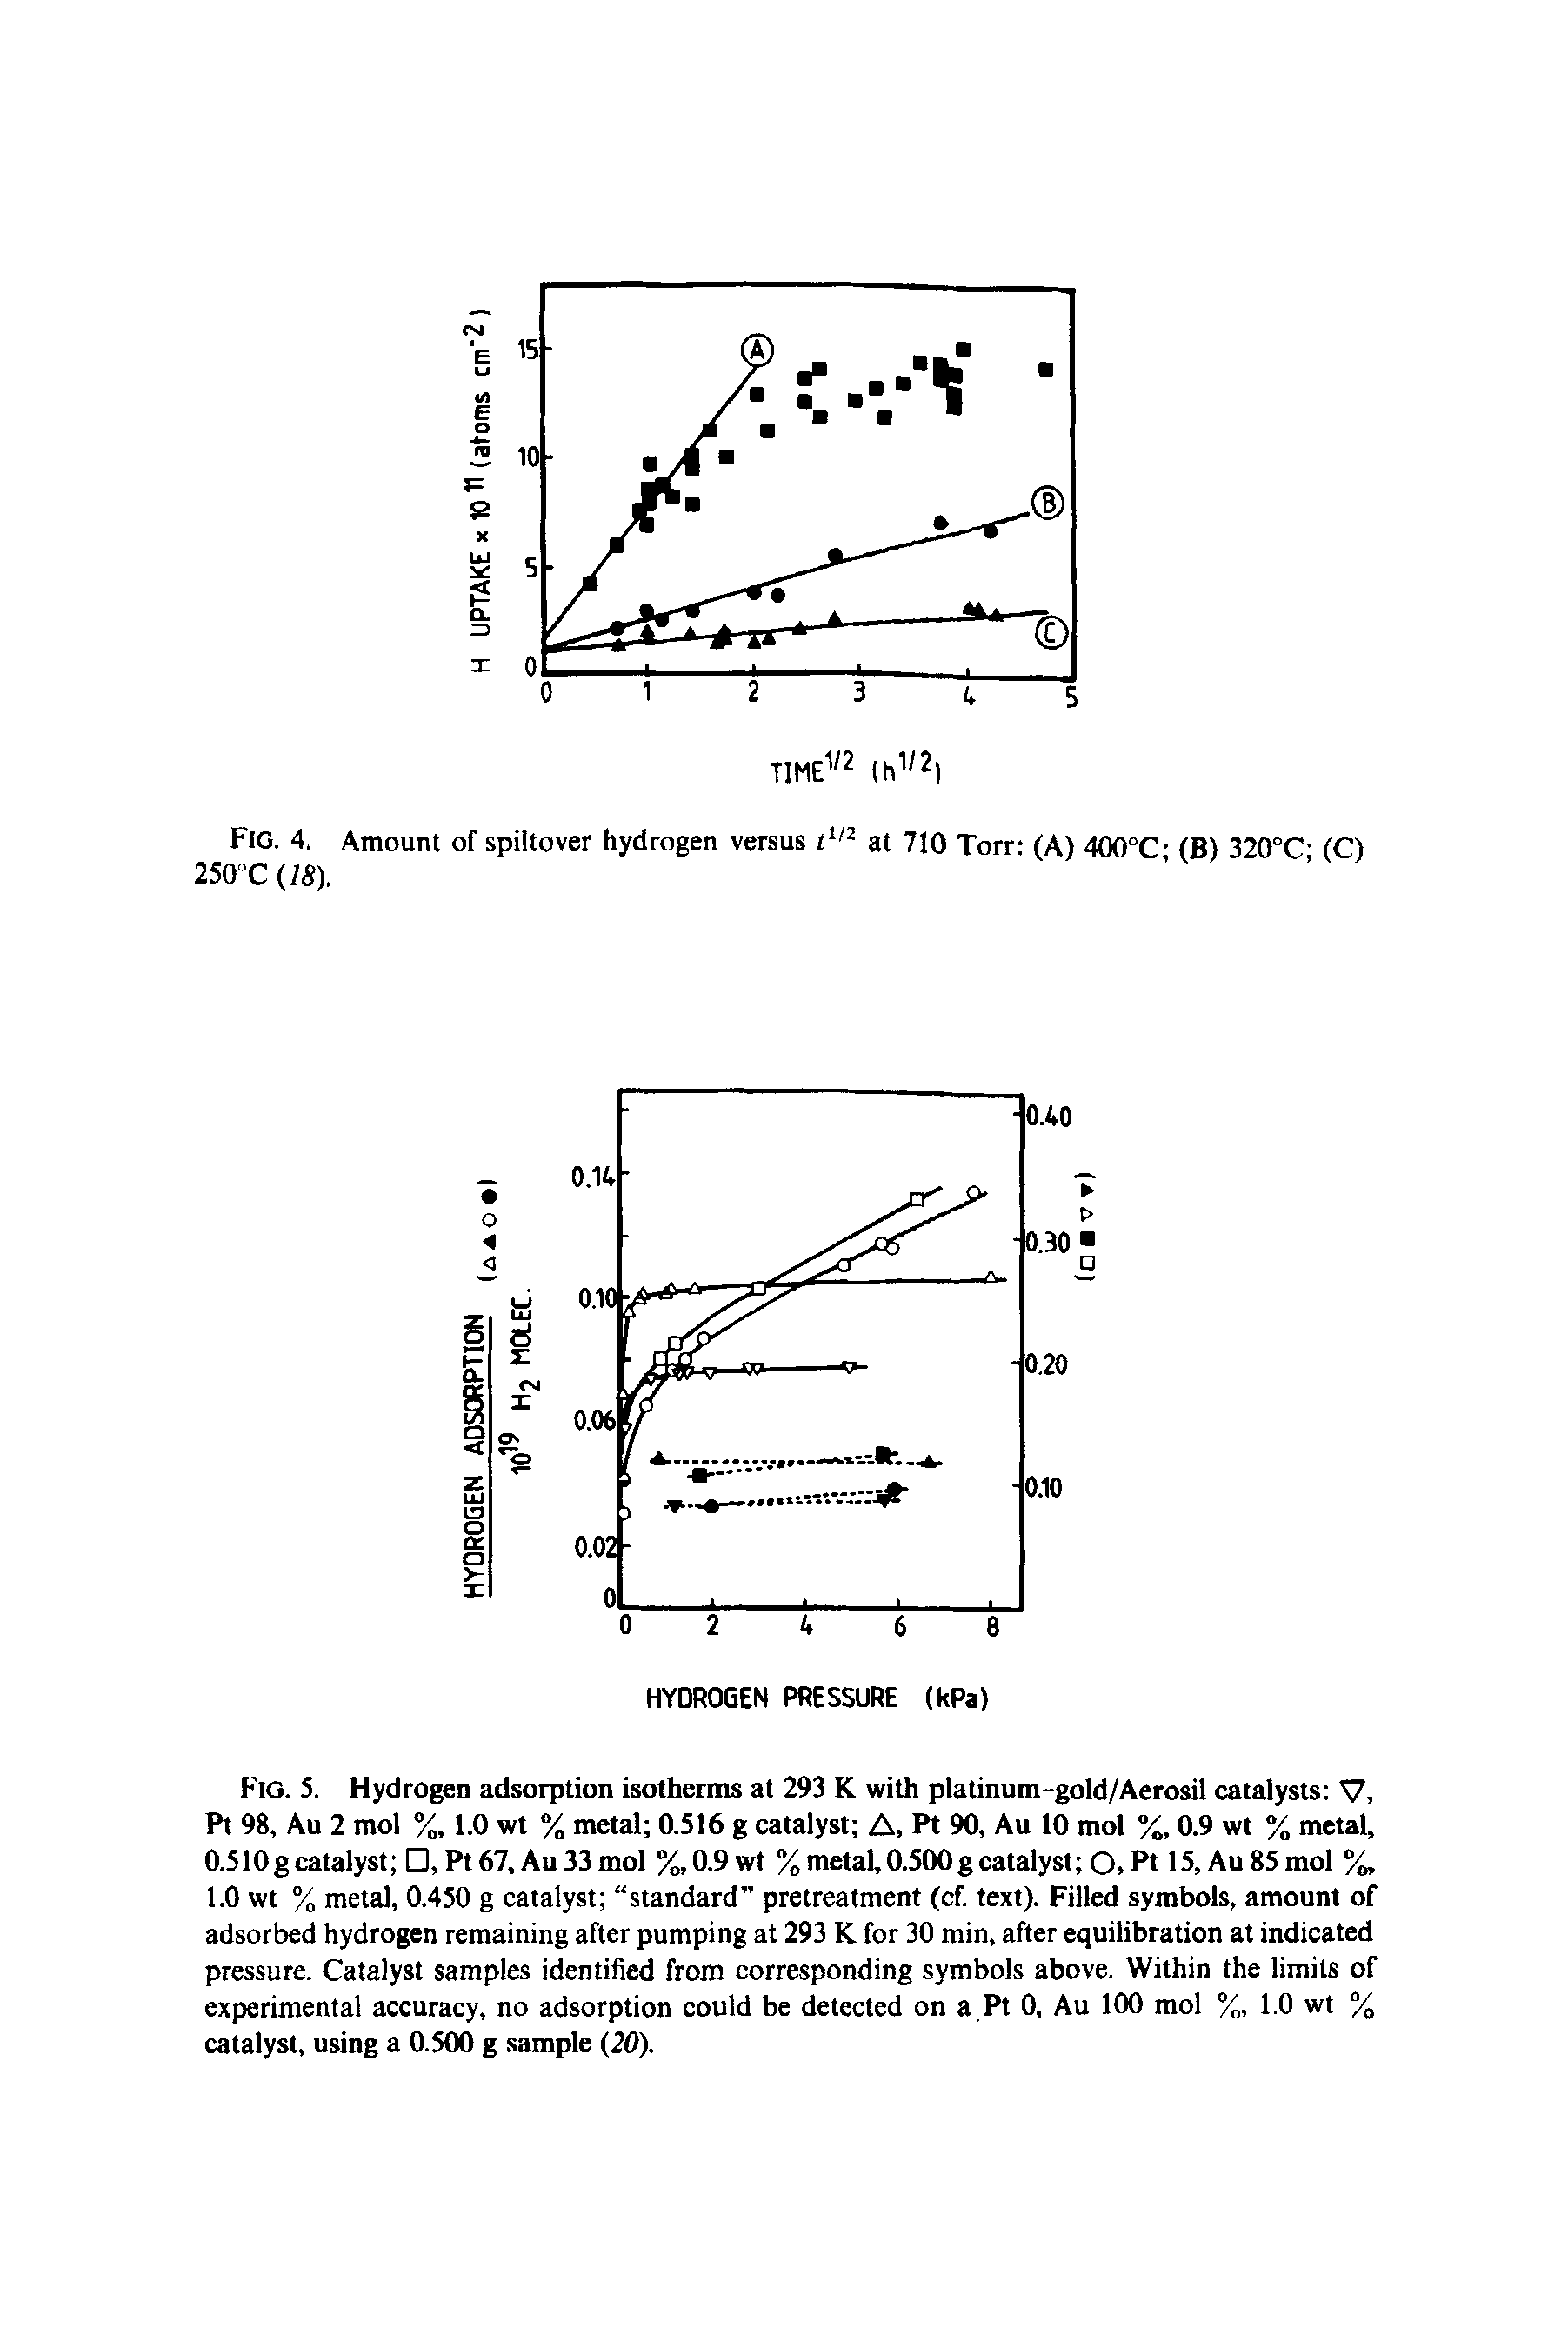 Fig. 5. Hydrogen adsorption isotherms at 293 K with platinum-gold/Aerosil catalysts V, Pt 98, Au 2 mol %, 1.0 wt % metal 0.516 g catalyst A, Pt 90, Au 10 mol %, 0.9 wt % metal, 0.510gcatalyst , Pt 67, Au 33 mol %,0.9wt % metal, 0.500g catalyst O.Pt 15, Au 85 mol %, 1.0 wt % metal, 0.450 g catalyst standard pretreatment (cf. text). Filled symbols, amount of adsorbed hydrogen remaining after pumping at 293 K for 30 min, after equilibration at indicated pressure. Catalyst samples identified from corresponding symbols above. Within the limits of experimental accuracy, no adsorption could be detected on a Pt 0, Au 100 mol %, 1.0 wt % catalyst, using a 0.500 g sample (20).